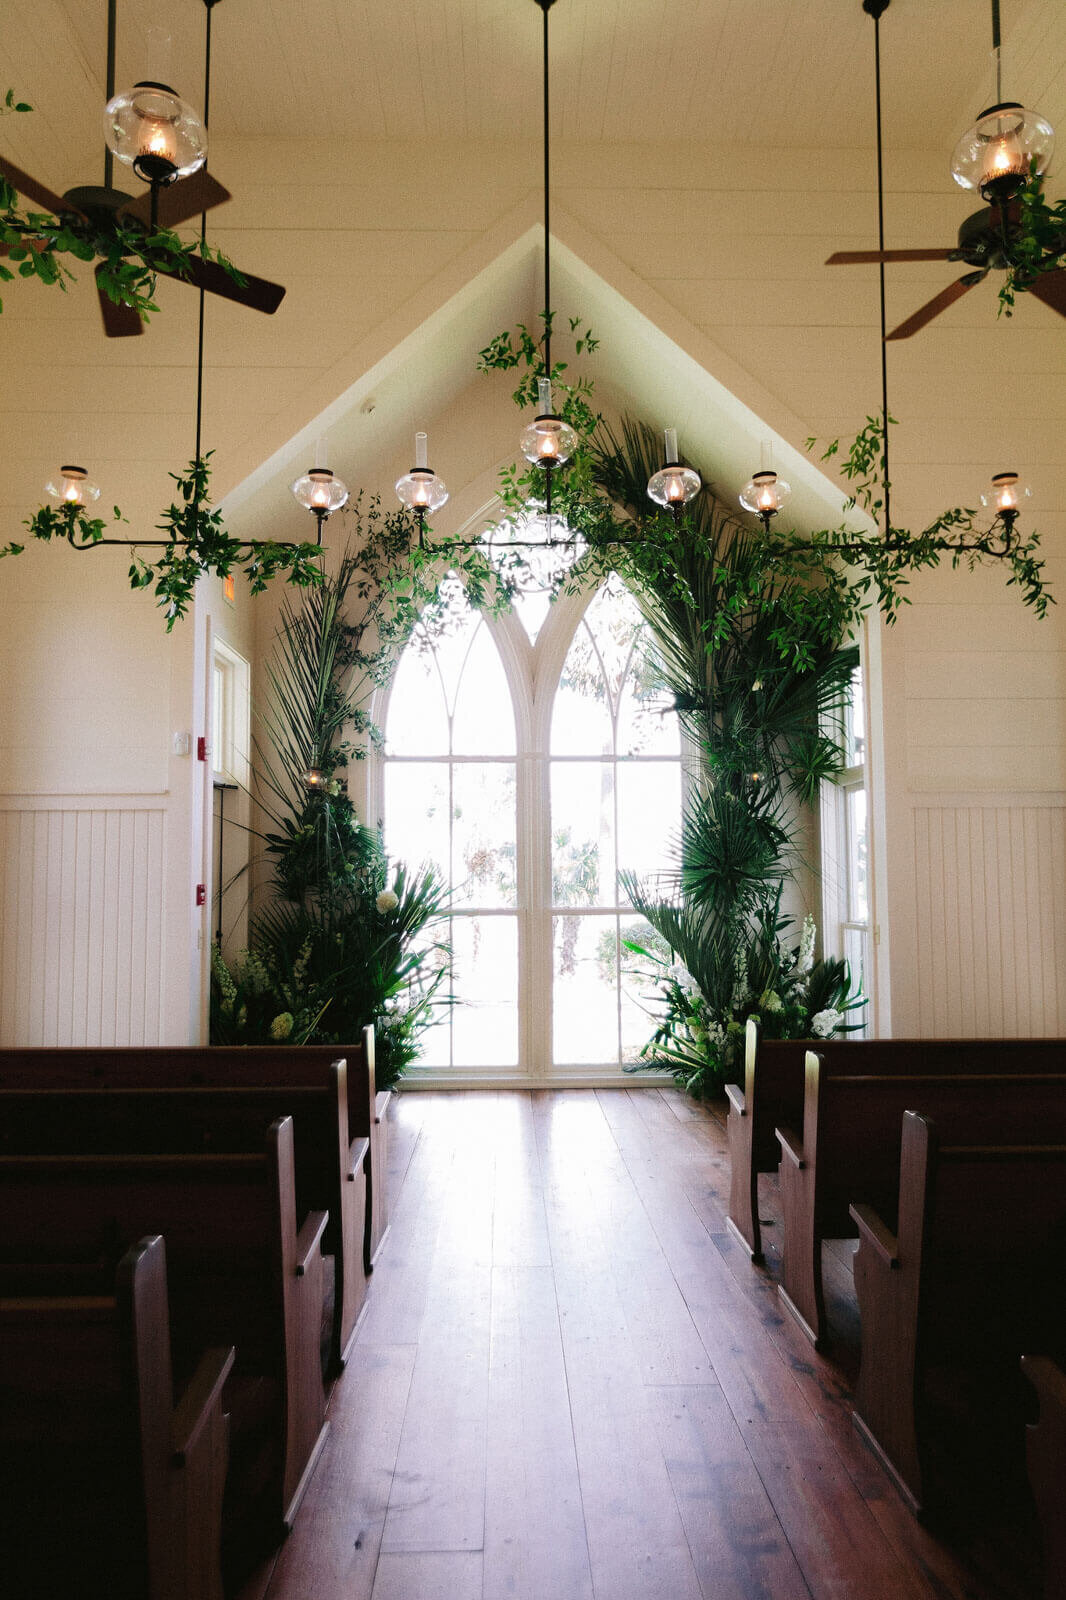 Simple but beautiful wedding altar in Montage at Palmetto Bluff. Destination wedding image by Jenny Fu Studio